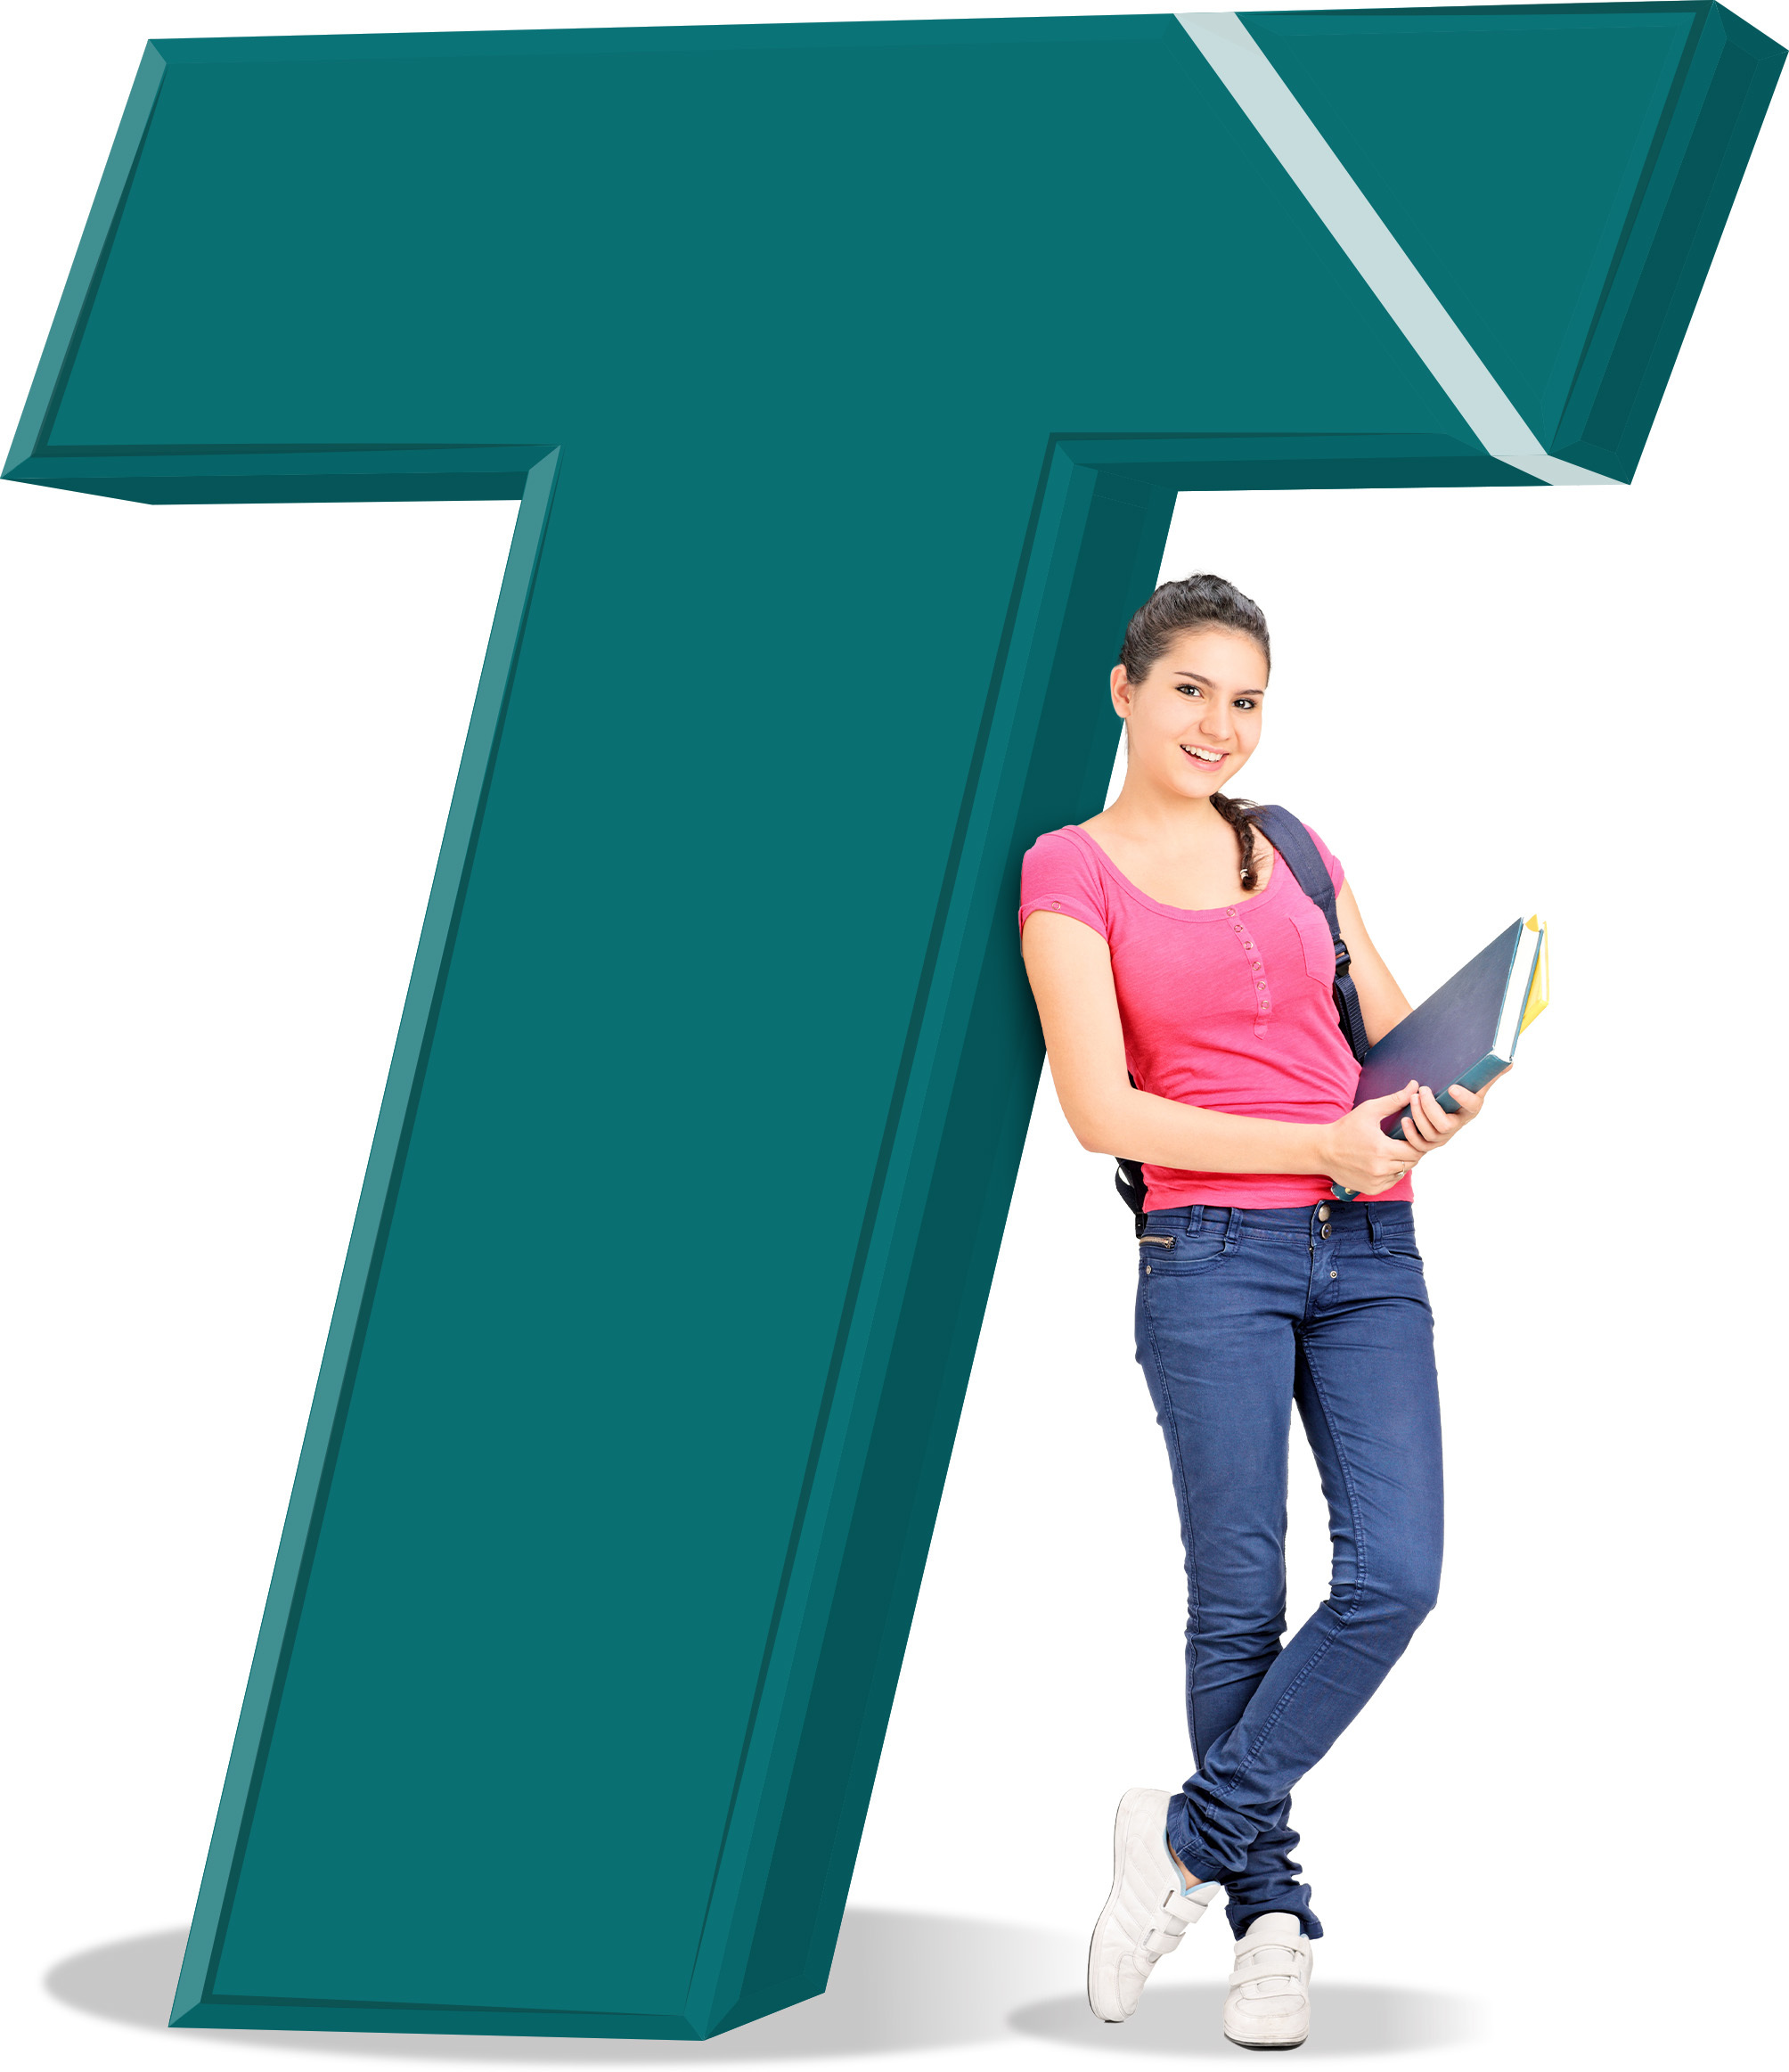 Female student holding books standing next to a large teal T